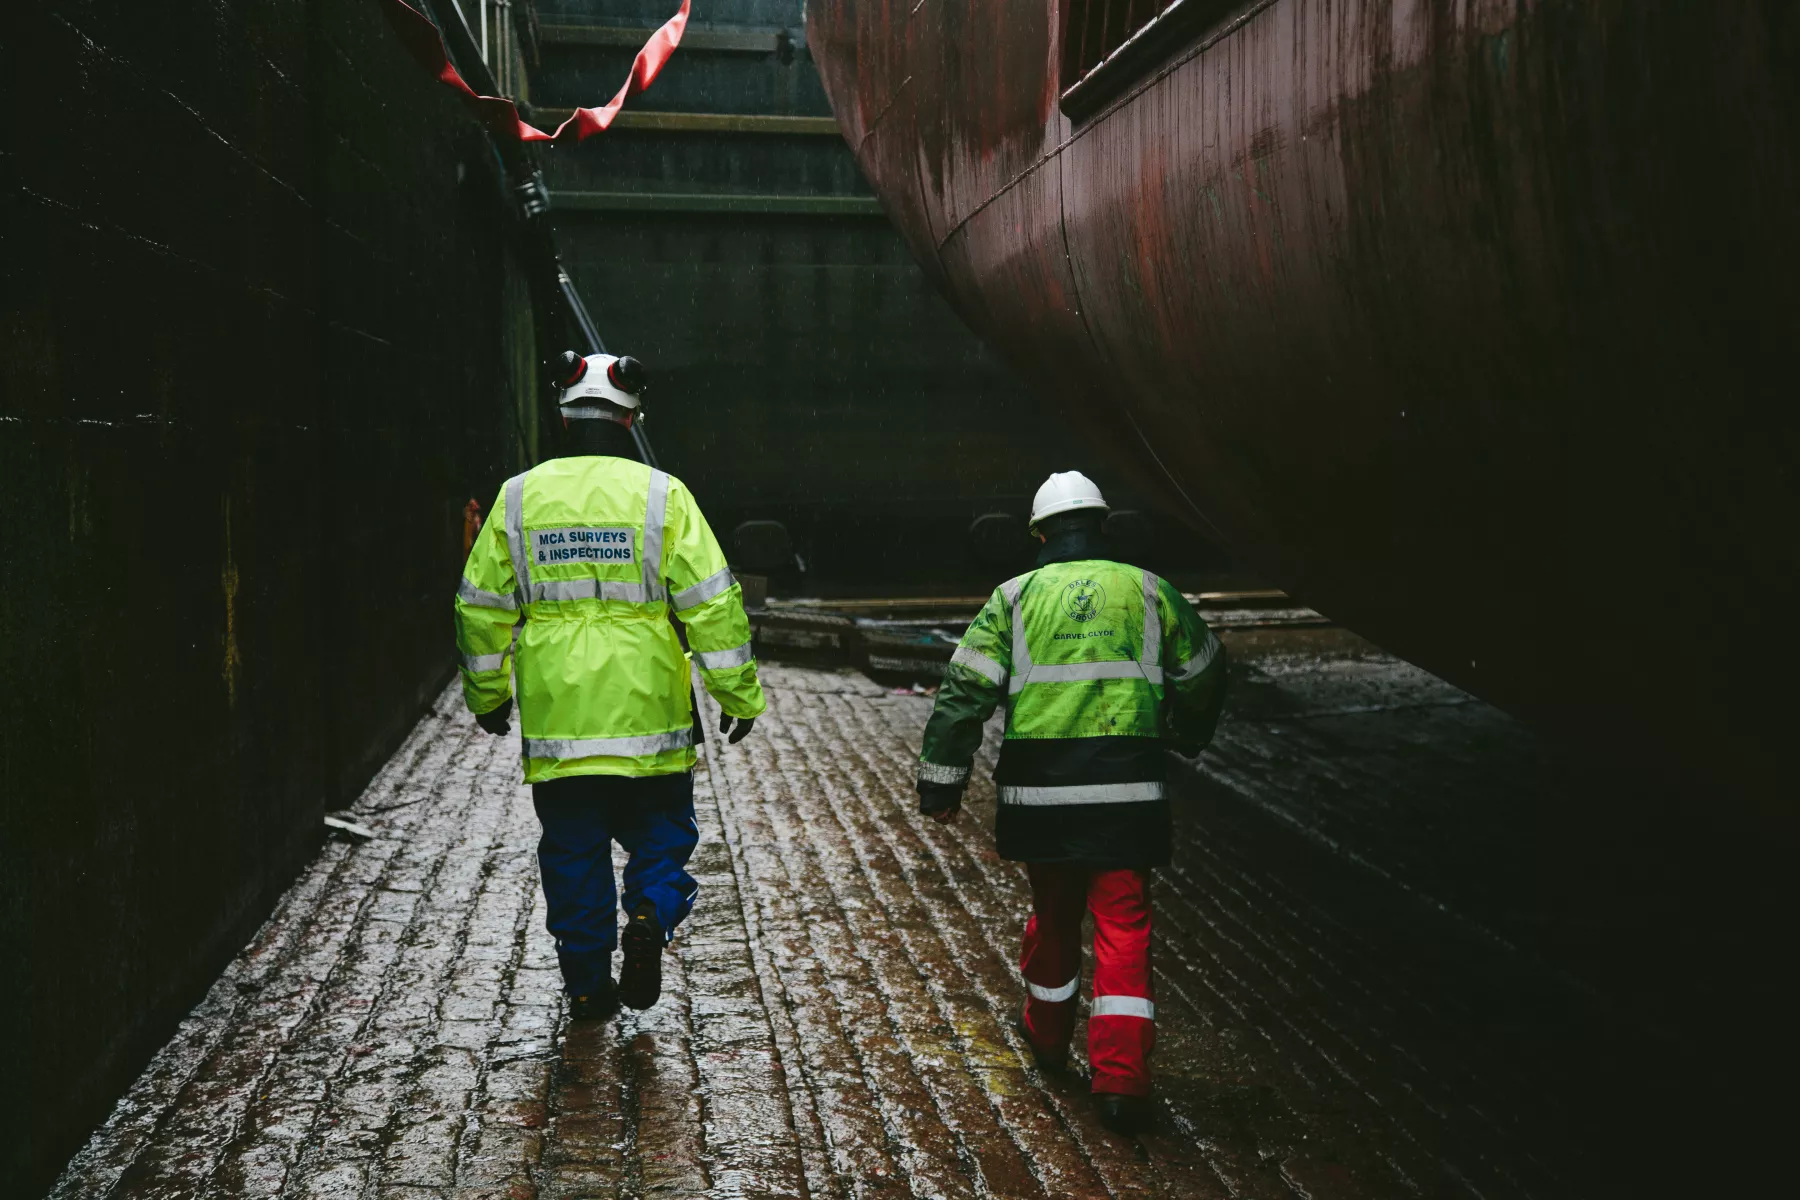 Two surveyors in high-vis walking underneath dry docked vessel during inspection